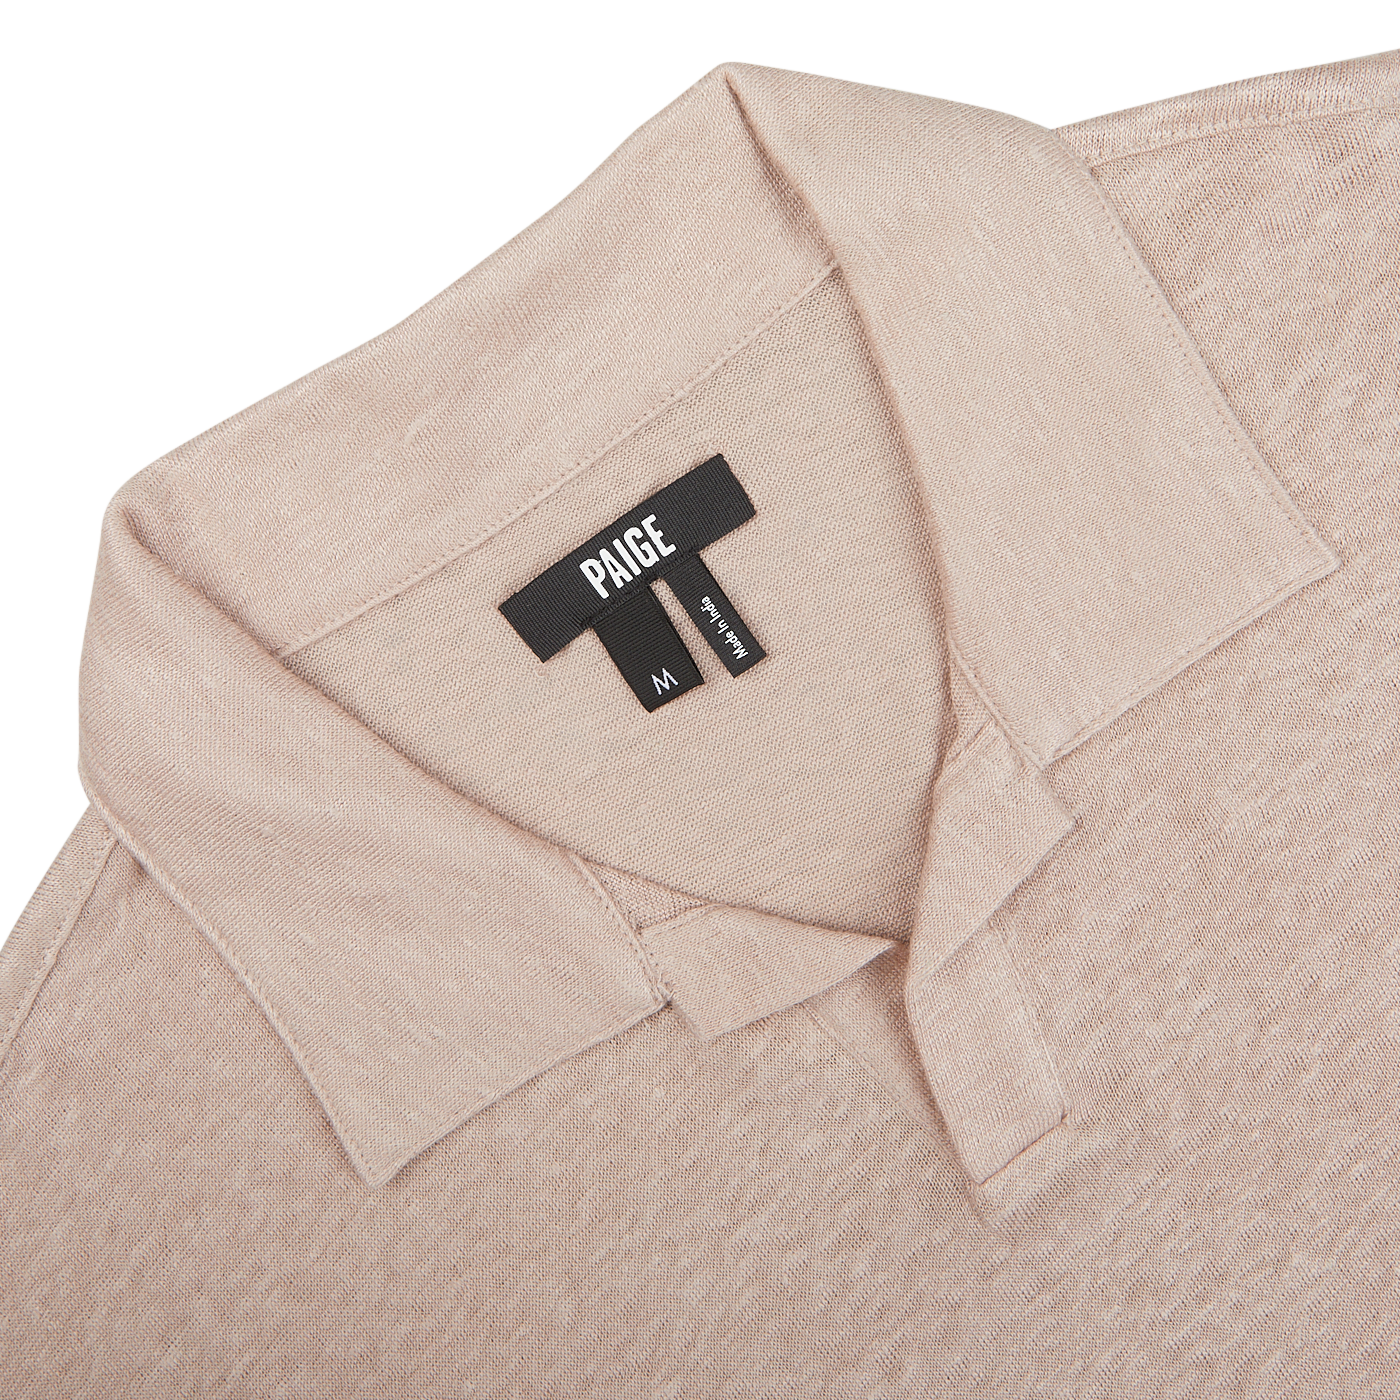 Close-up of a Light Pink Linen Capri Collar Polo Shirt's label with the brand "Paige" and size "M" on a light background.